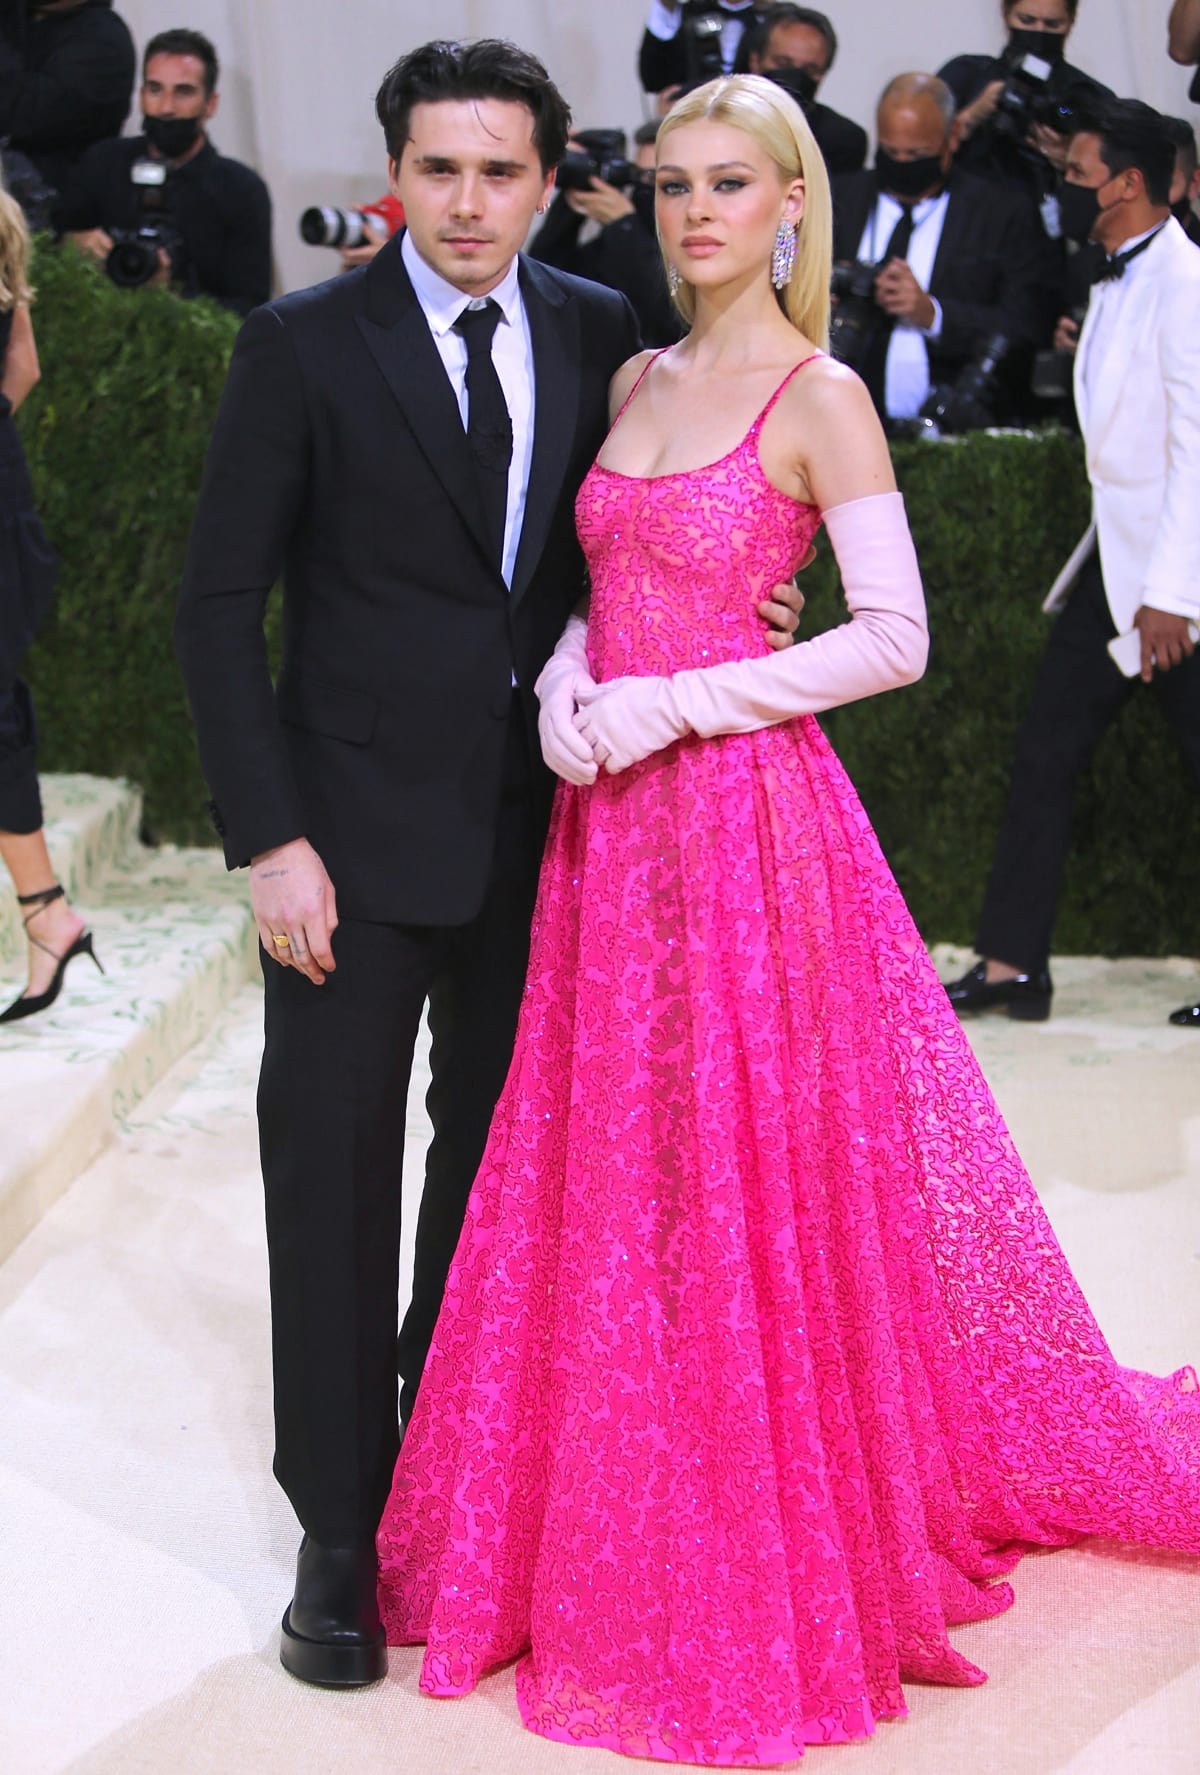 Brooklyn Beckham in a black Valentino suit and Nicola Peltz in a sparkling pink Valentino gown at the 2021 Met Gala benefit "In America: A Lexicon of Fashion" at Metropolitan Museum of Art